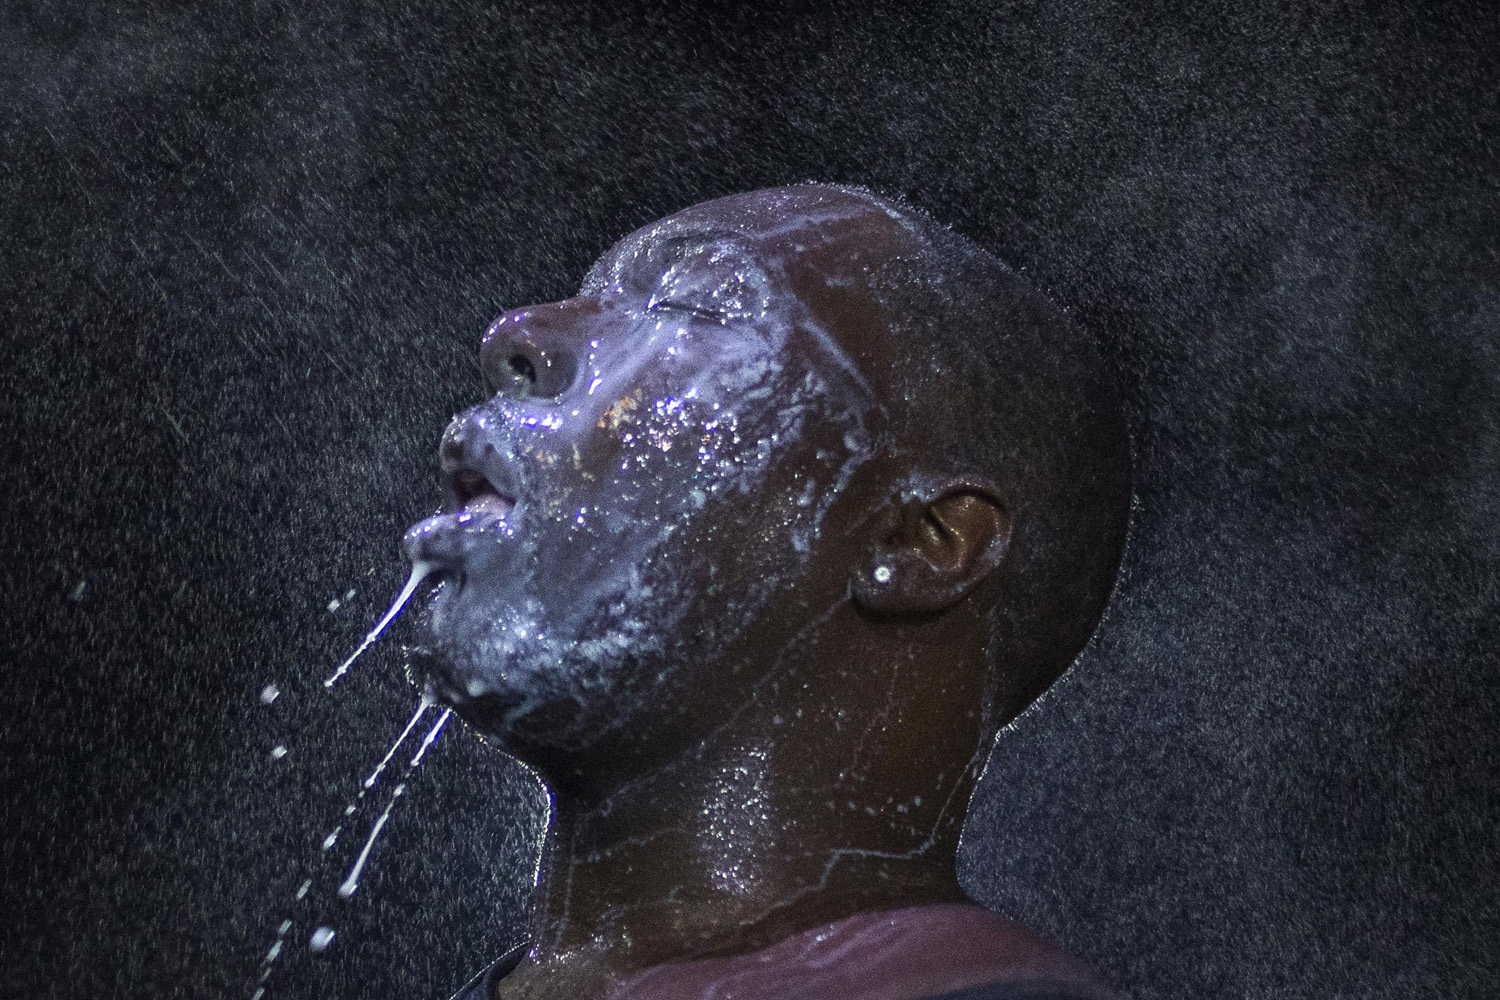 Aug. 20, 2014. A man is doused with milk and sprayed with mist after being hit by an eye irritant from security forces trying to disperse demonstrators protesting against the shooting of unarmed black teen Michael Brown in Ferguson, Missouri.